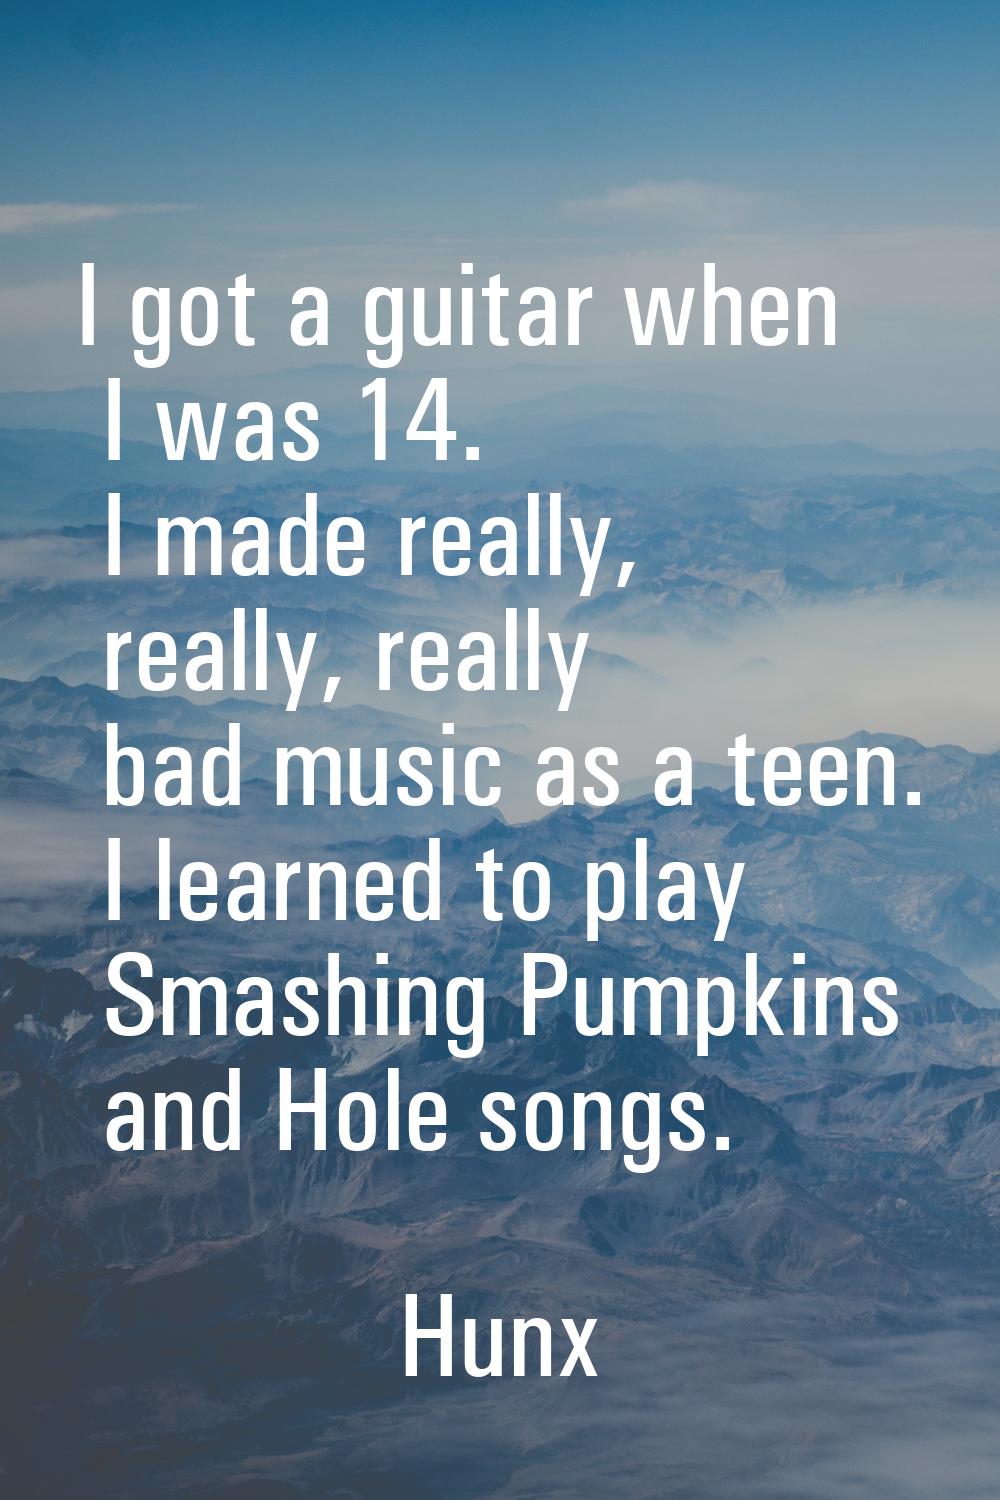 I got a guitar when I was 14. I made really, really, really bad music as a teen. I learned to play 